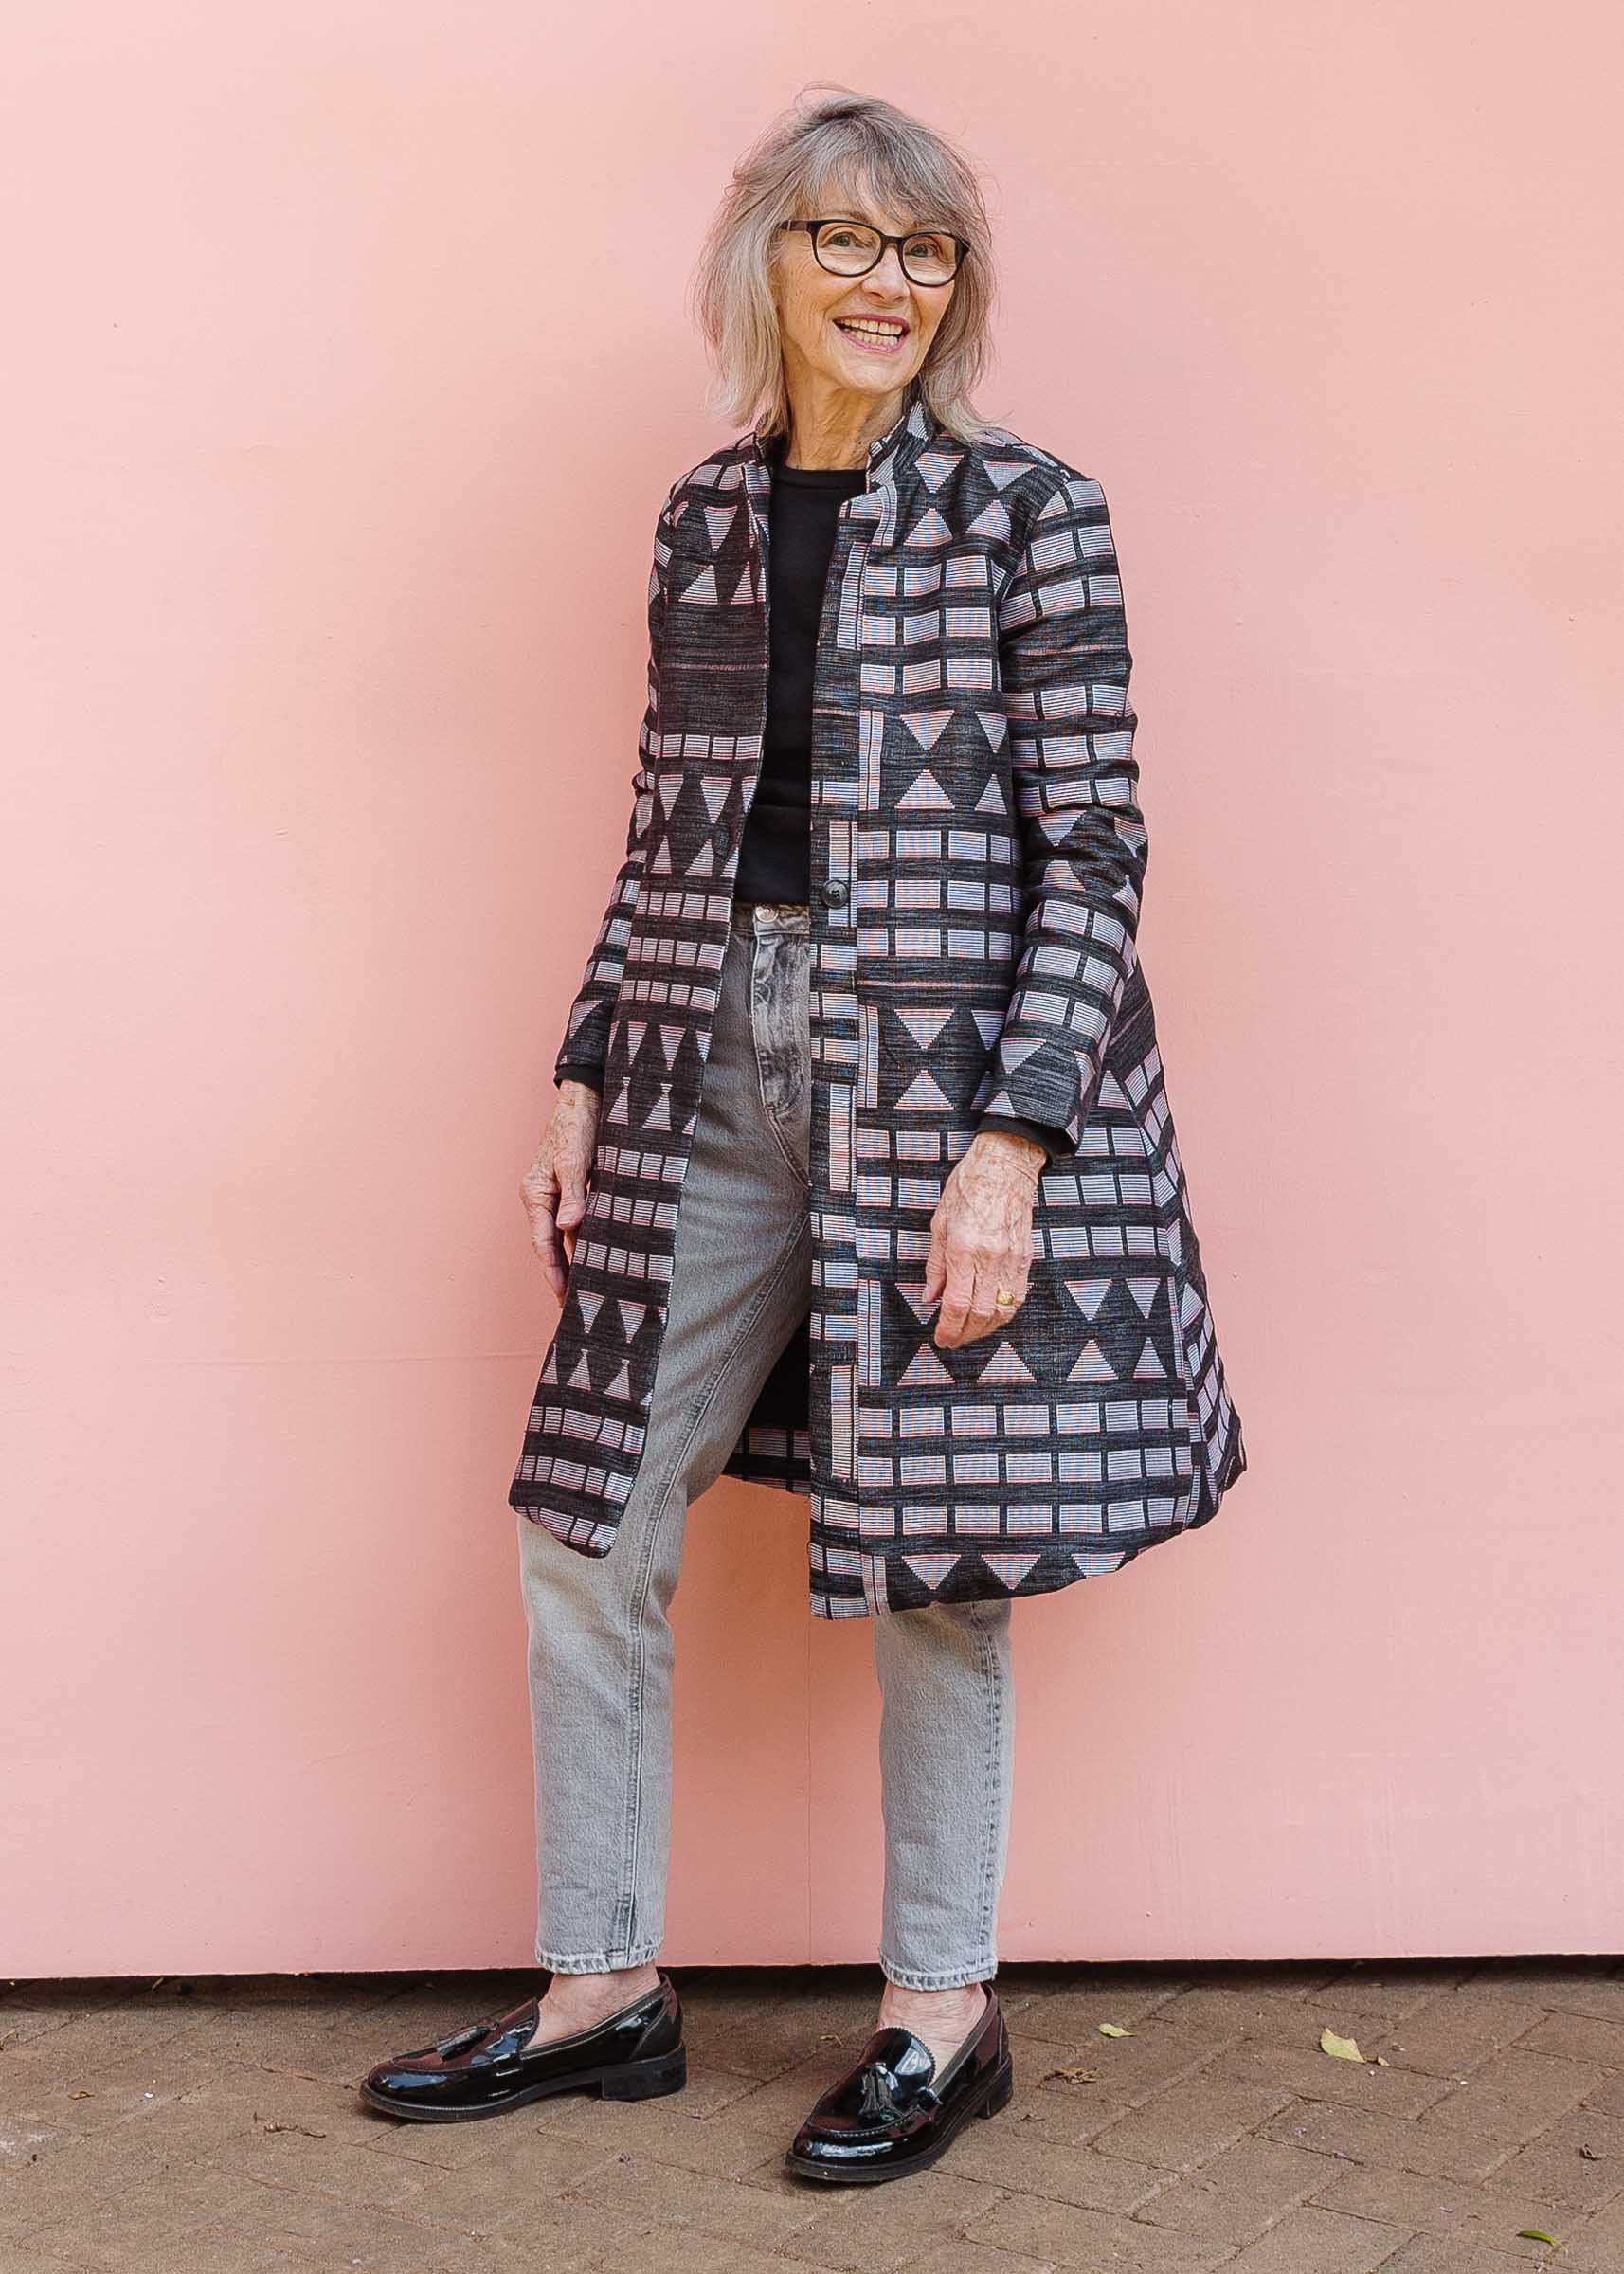 Model wearing long gray jacket with pink and white weave.